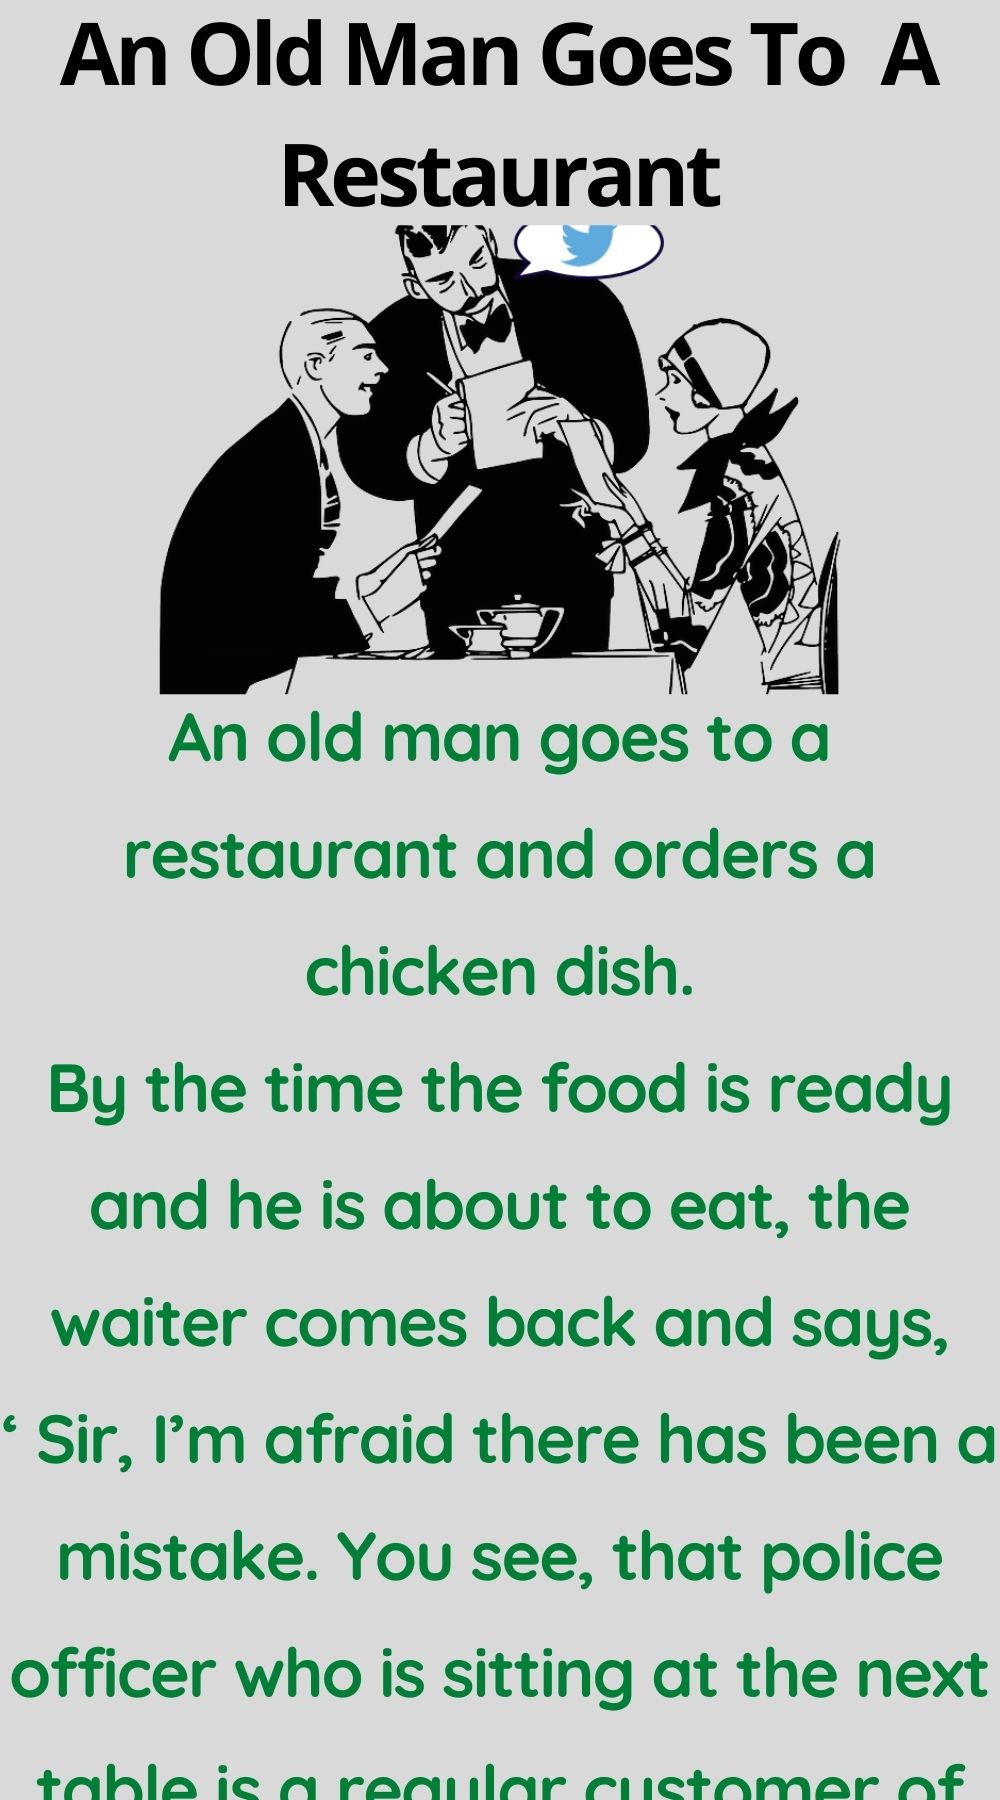 An Old Man Goes To A Restaurant